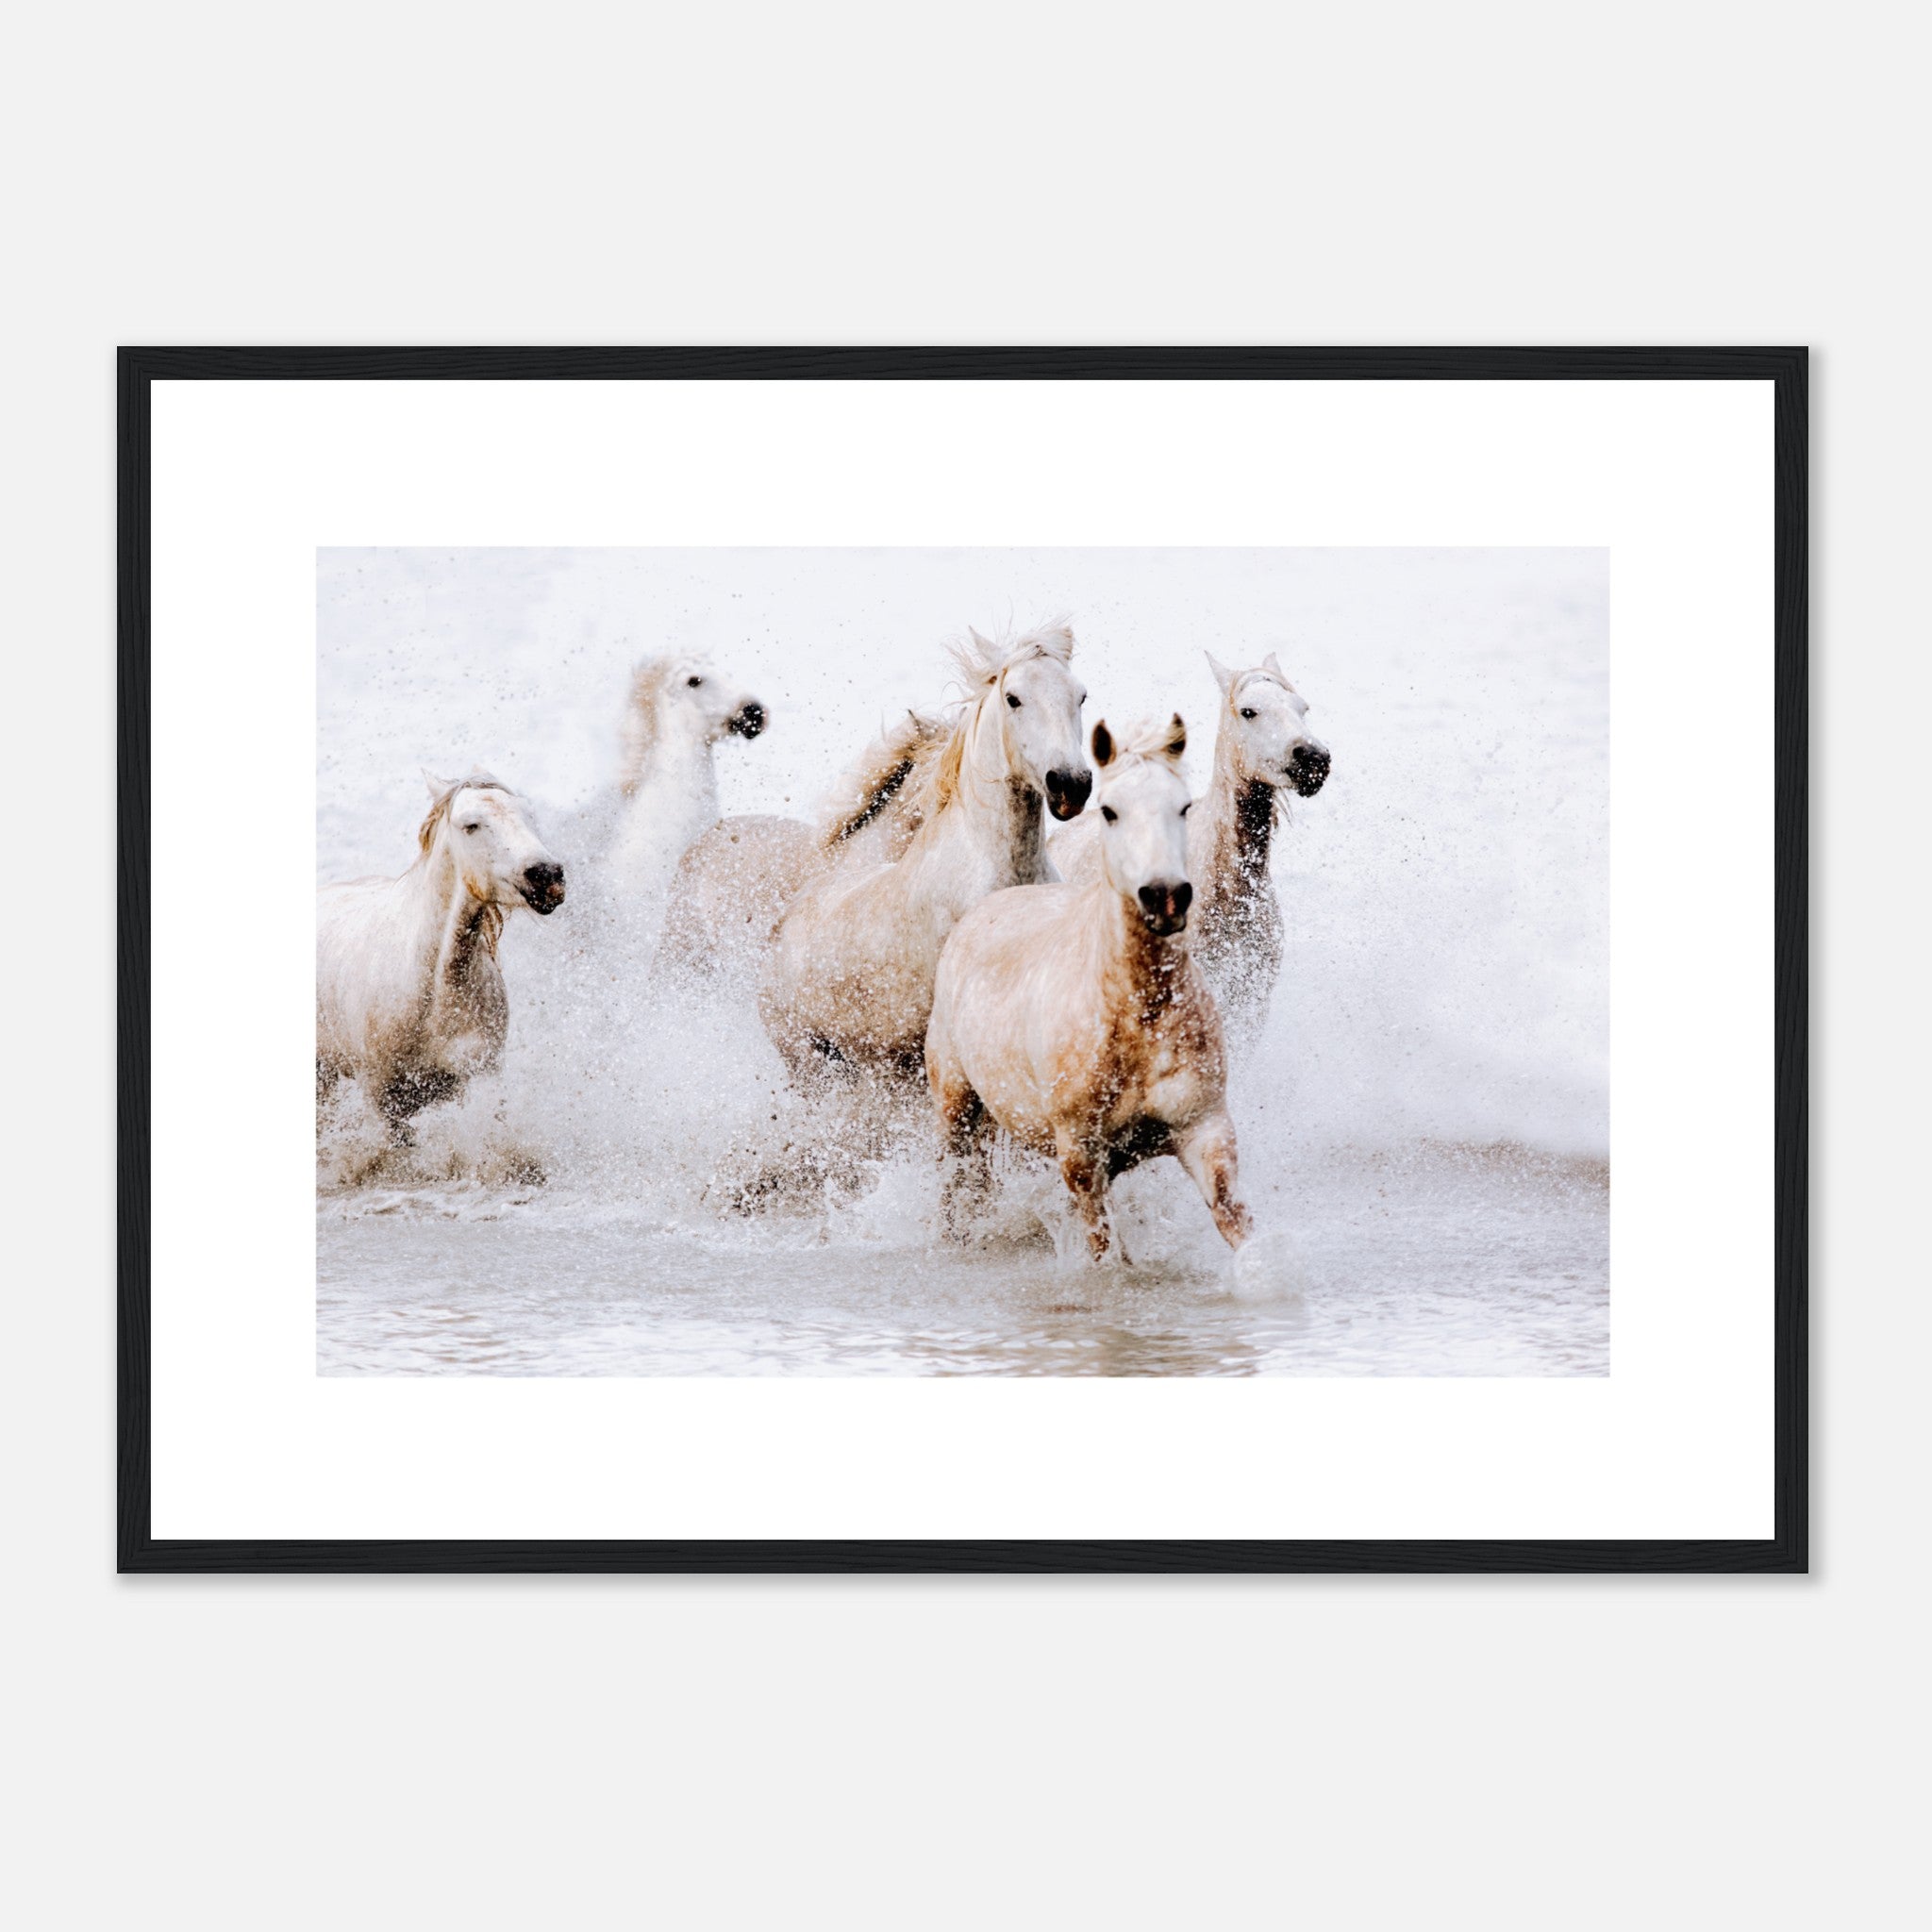 Galloping Wild Horses Poster